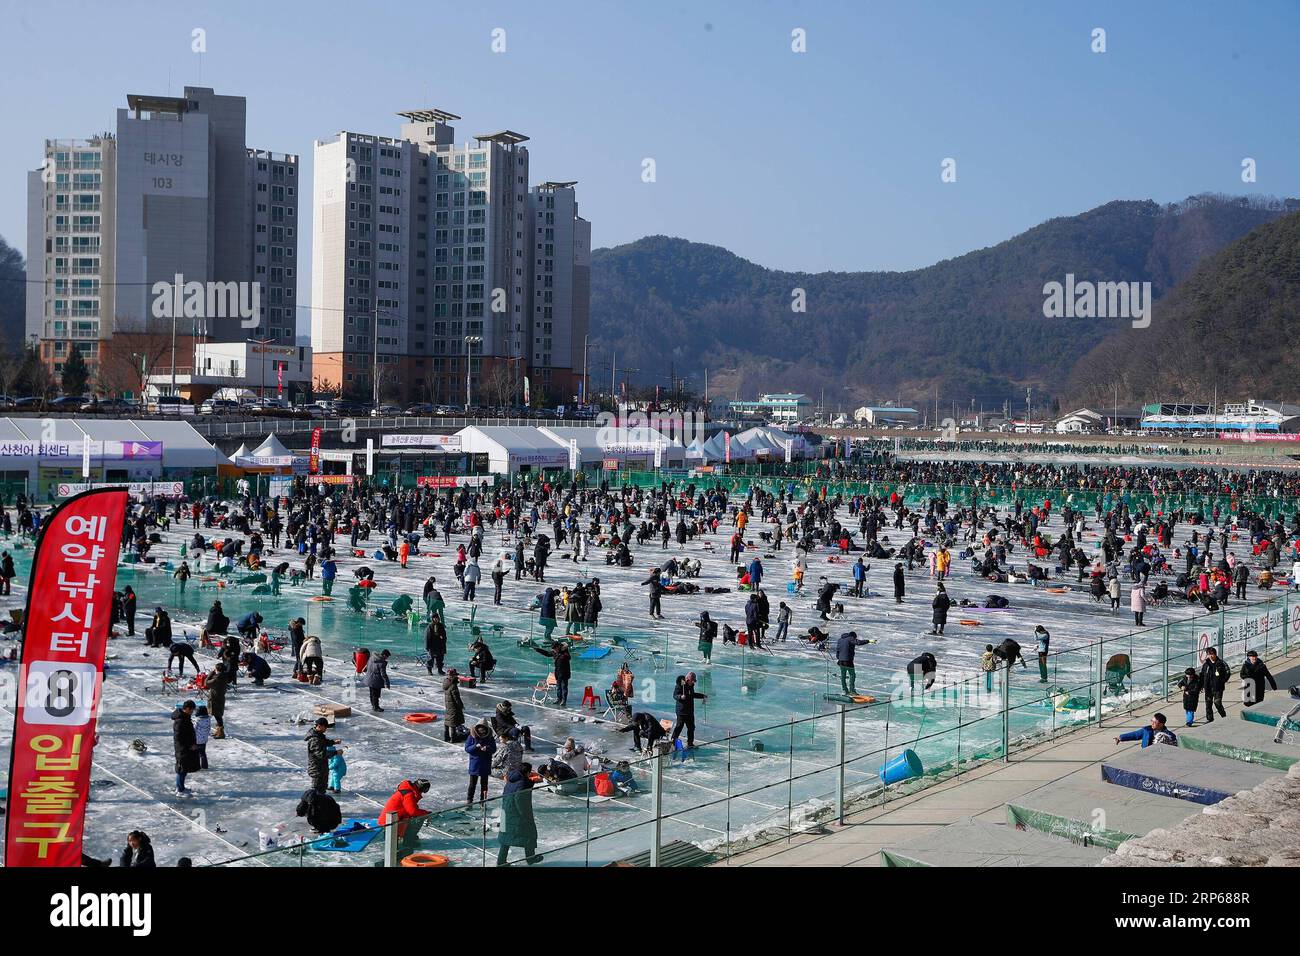 (190105) -- HWACHEON, Jan. 5, 2019 -- People fish for trouts on a frozen river during the Sancheoneo Ice Festival in Hwacheon, South Korea, Jan. 5, 2019. As one of the biggest winter events in South Korea, the annual three-week festival draws people to the frozen Hwacheon river, where organizers drill fishing holes in the ice and release trouts into the river during the festival period. This year the festival lasts from Jan. 5 to Jan. 27. ) SOUTH KOREA-HWACHEON-SANCHEONEO ICE FESTIVAL WangxJingqiang PUBLICATIONxNOTxINxCHN Stock Photo